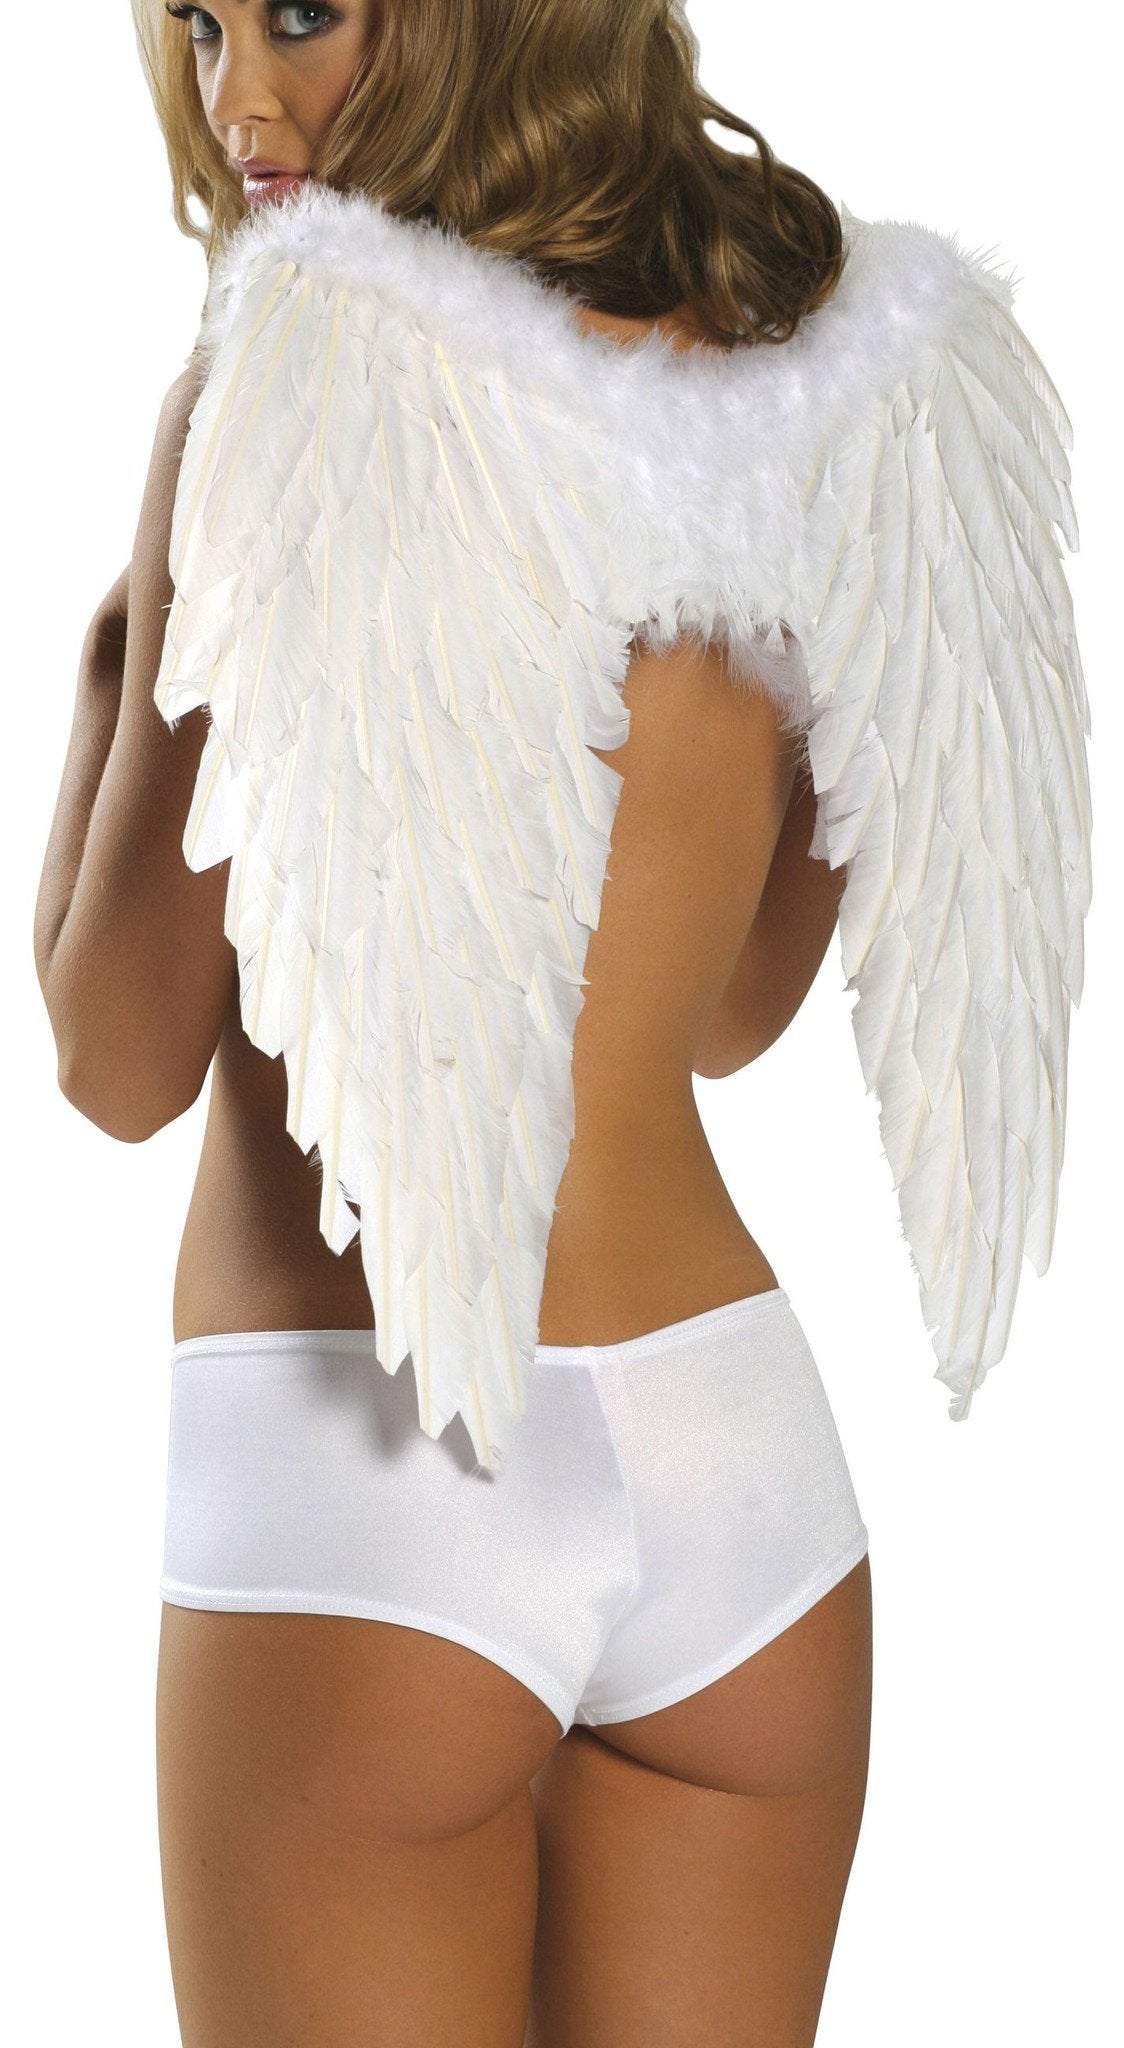 Roma Costume Accessories Black / One Size 1361 - Feathered Wings